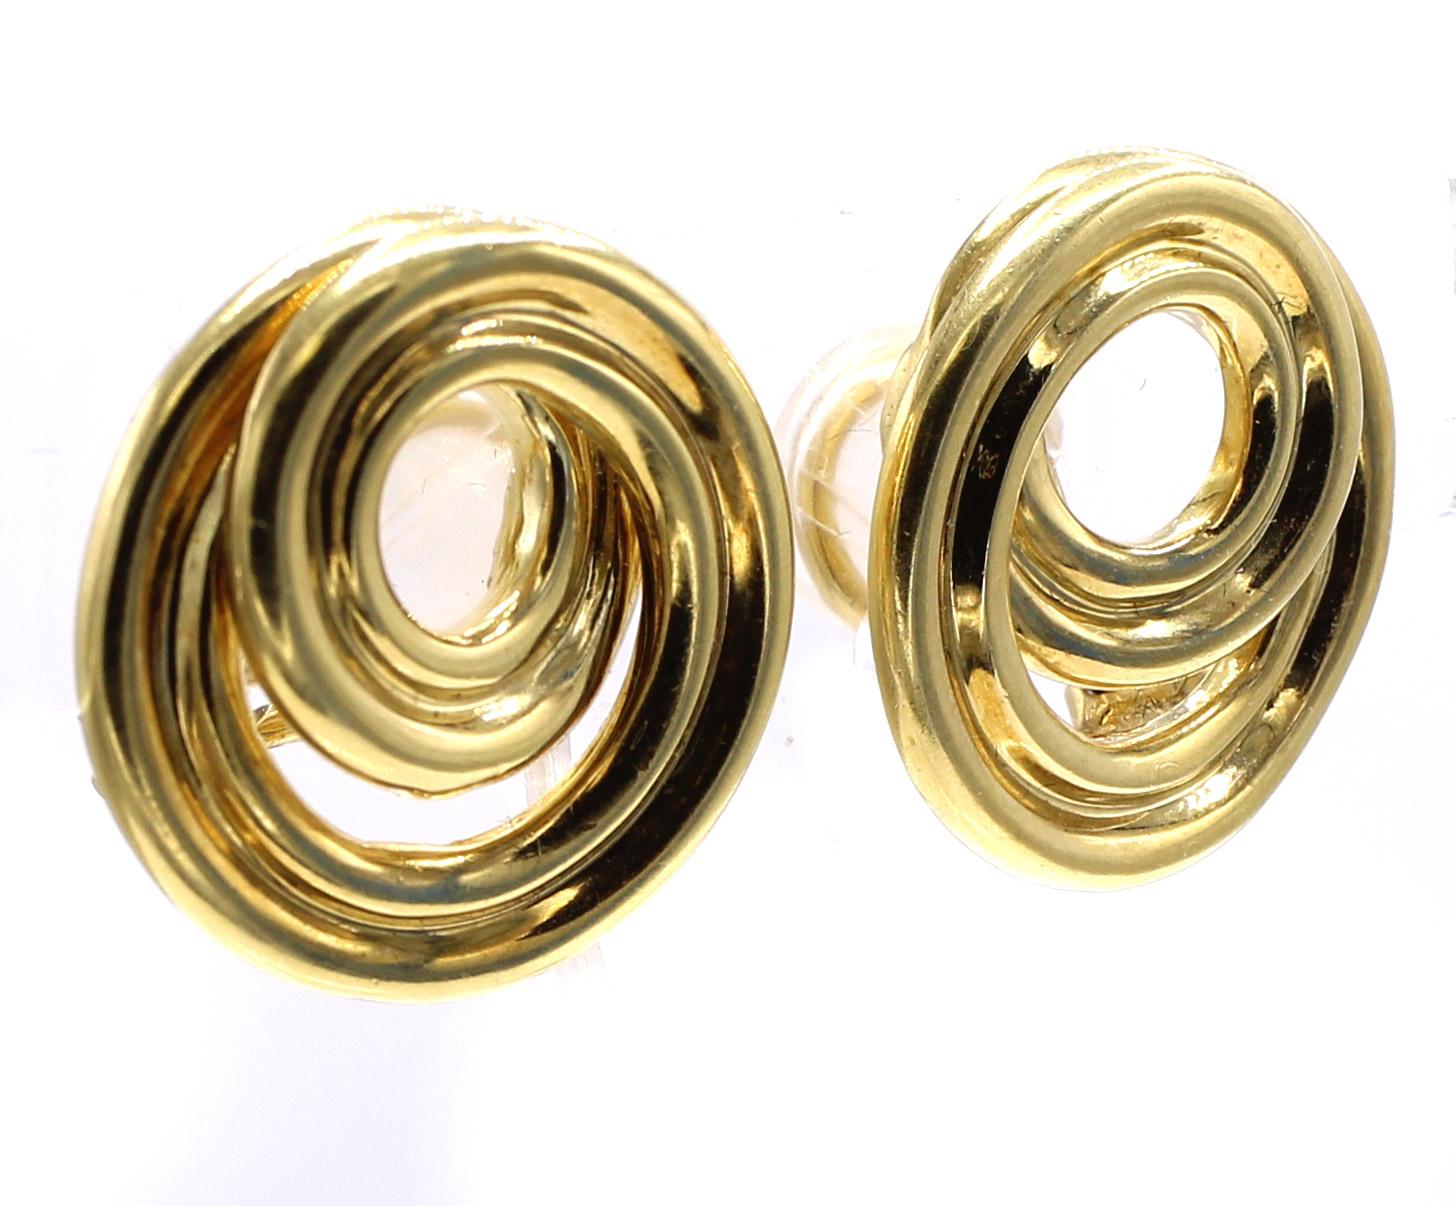 Chic 18 Karat yellow gold ear clips by Tiffany & Co. Diameter 7/8 inches. Stamped T & Co 750 on back of earrings
